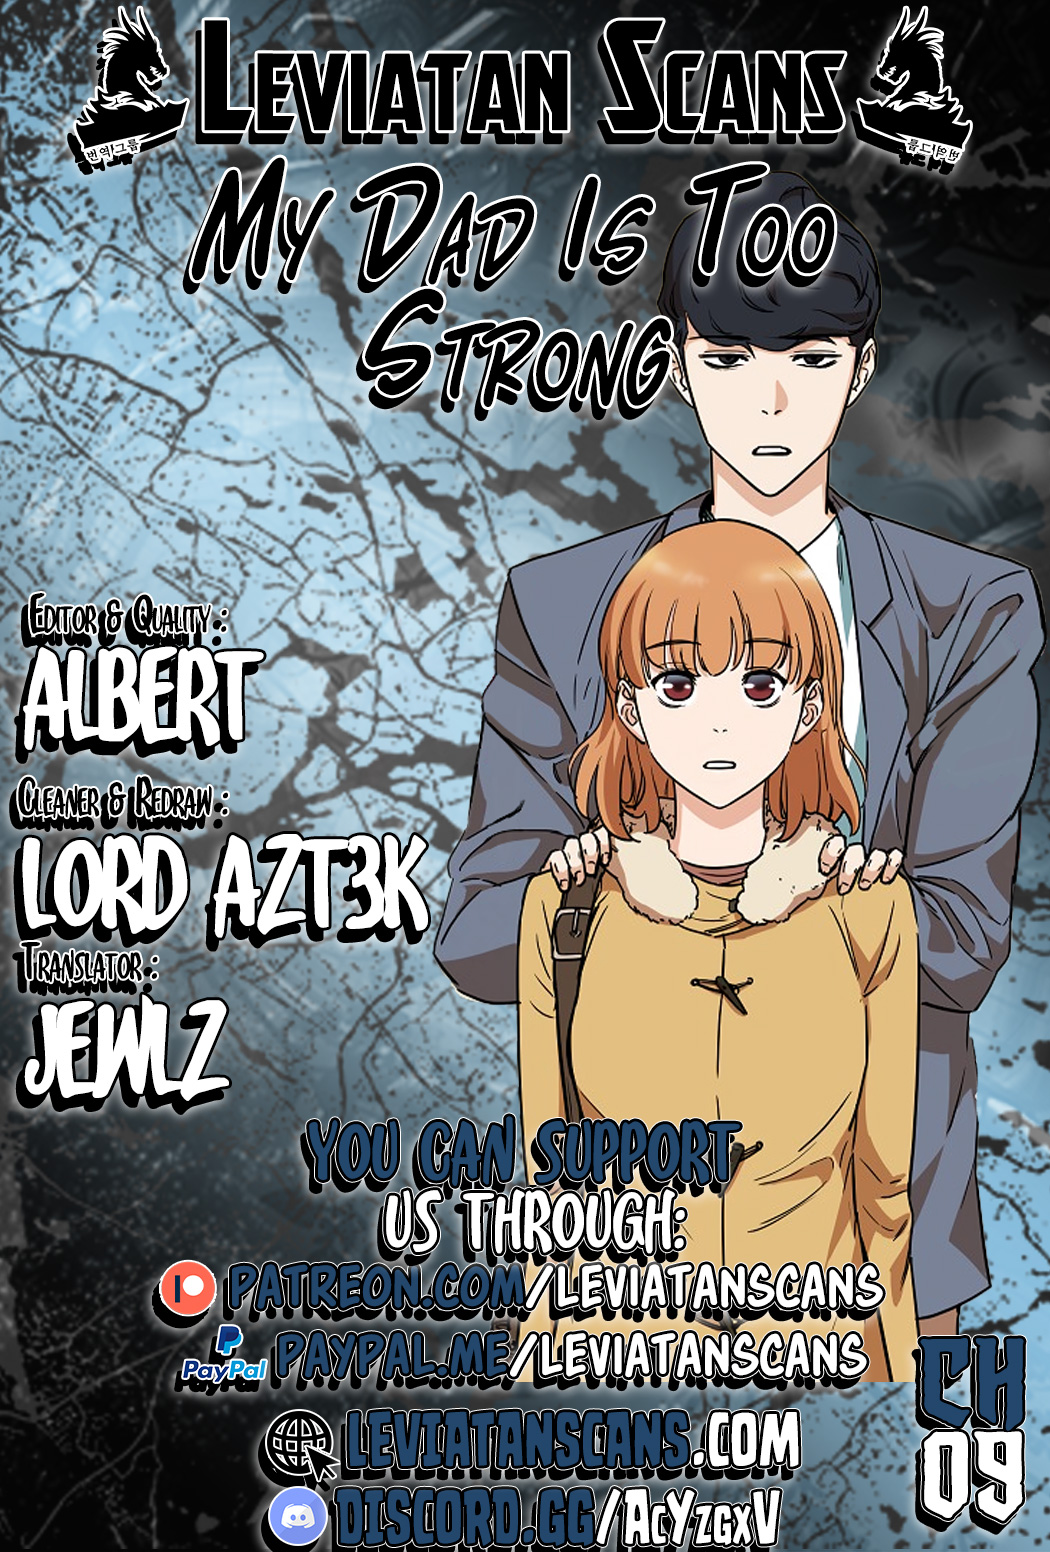 My Dad is Too Strong - Chapter 2588 - Image 1